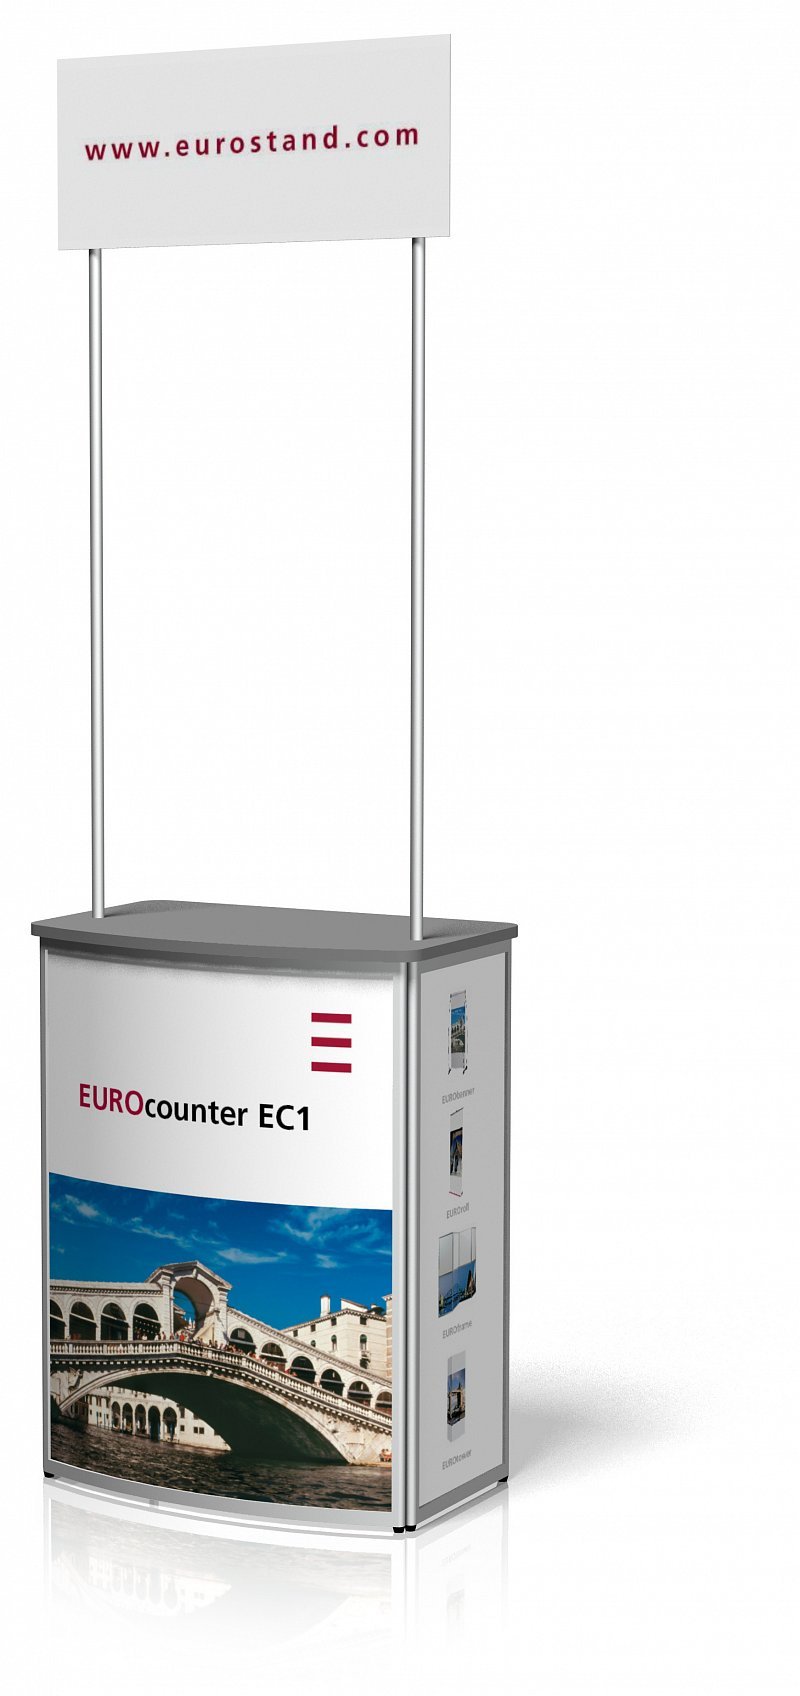 Tasting table EC-1 with logo, without printing